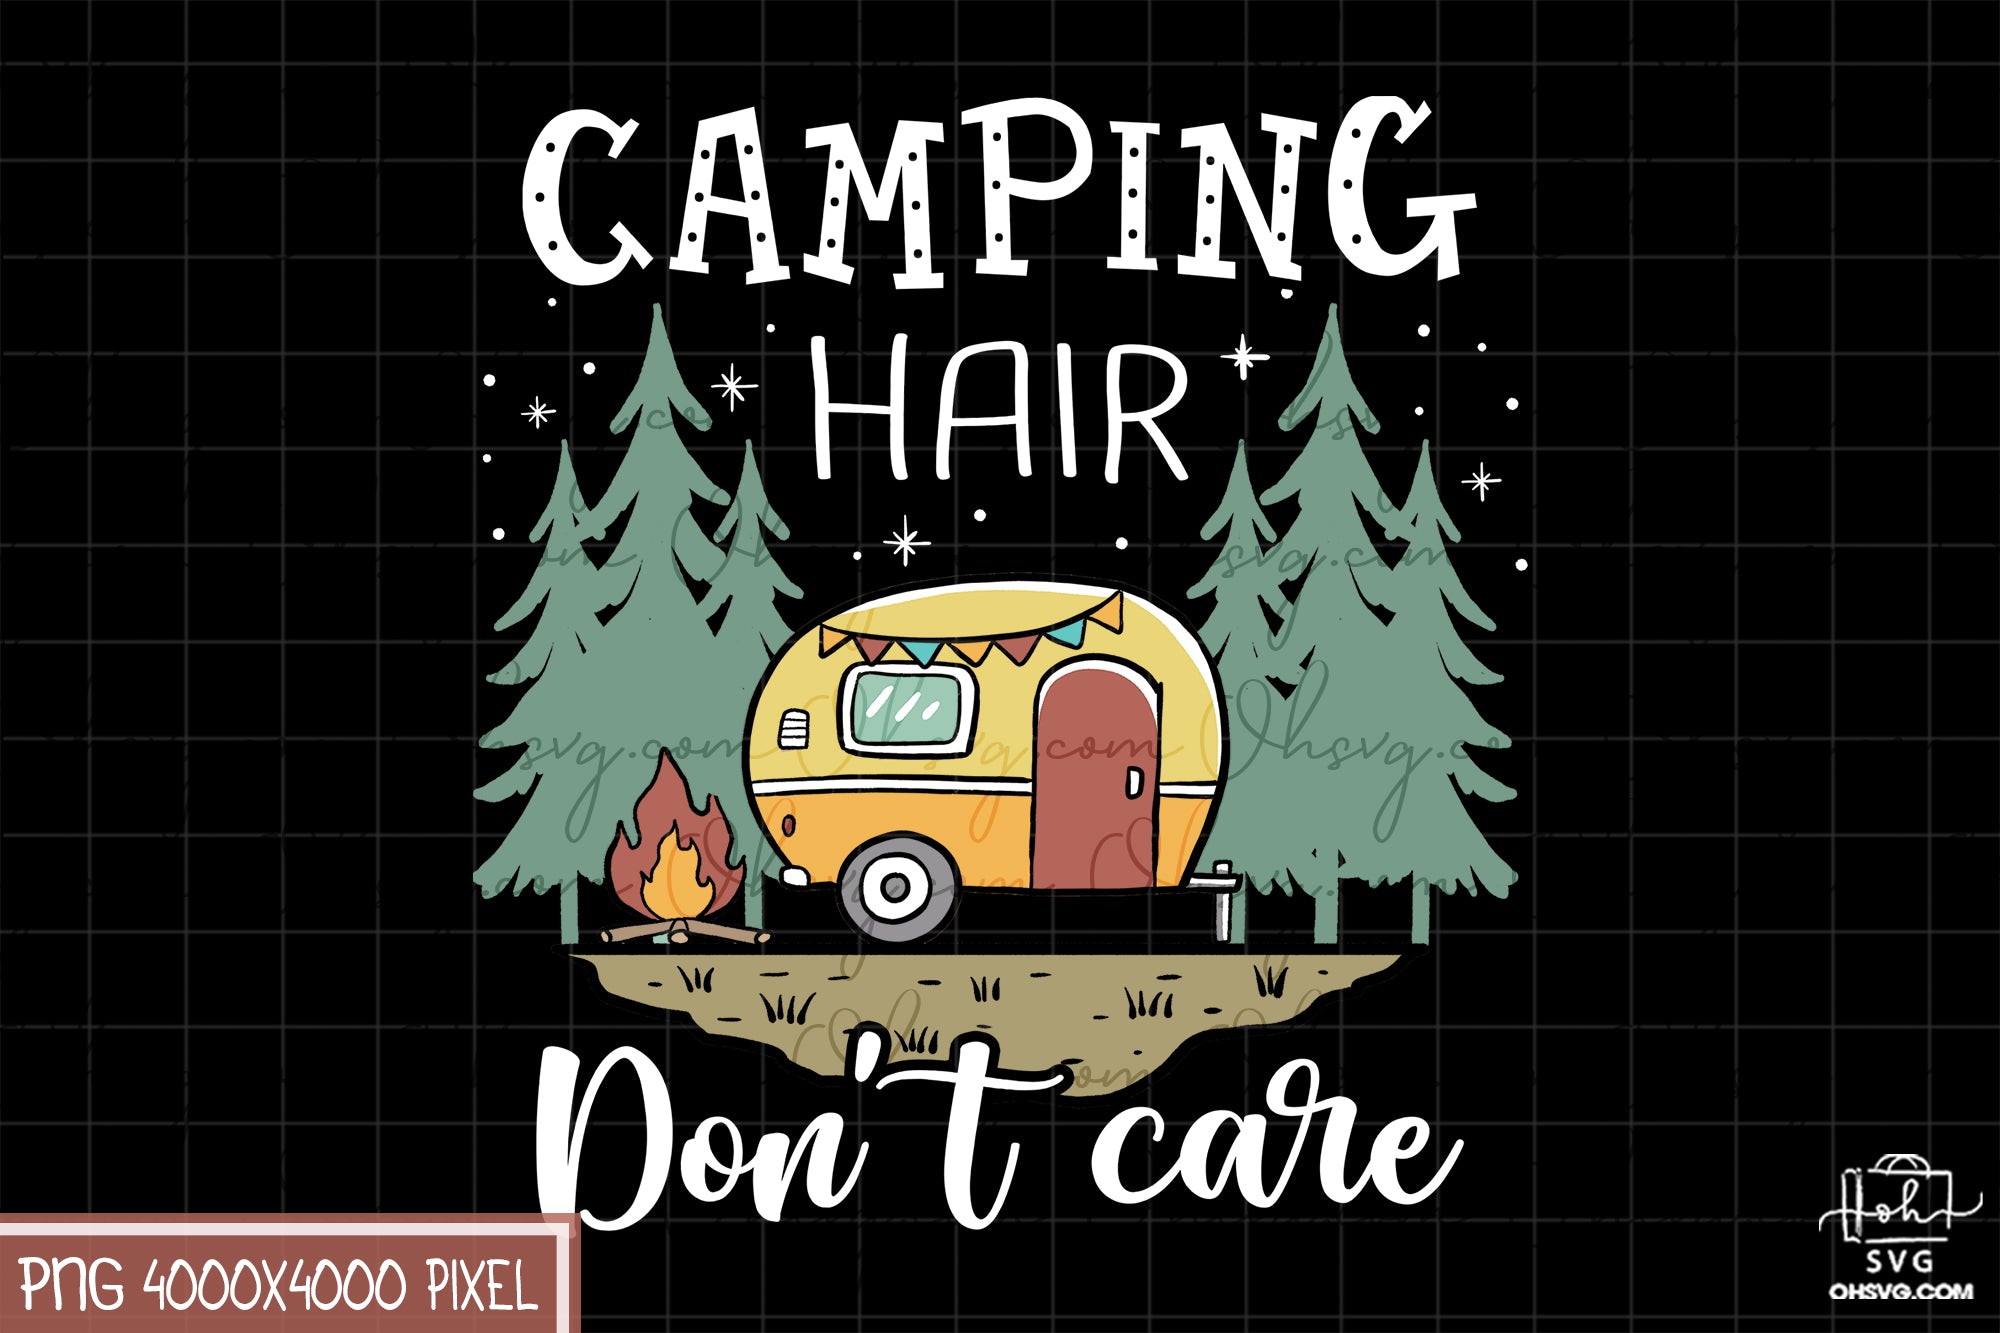 Camping Hair Don't Care Sublimation PNG, Camping Life PNG, Camping Outdoor PNG